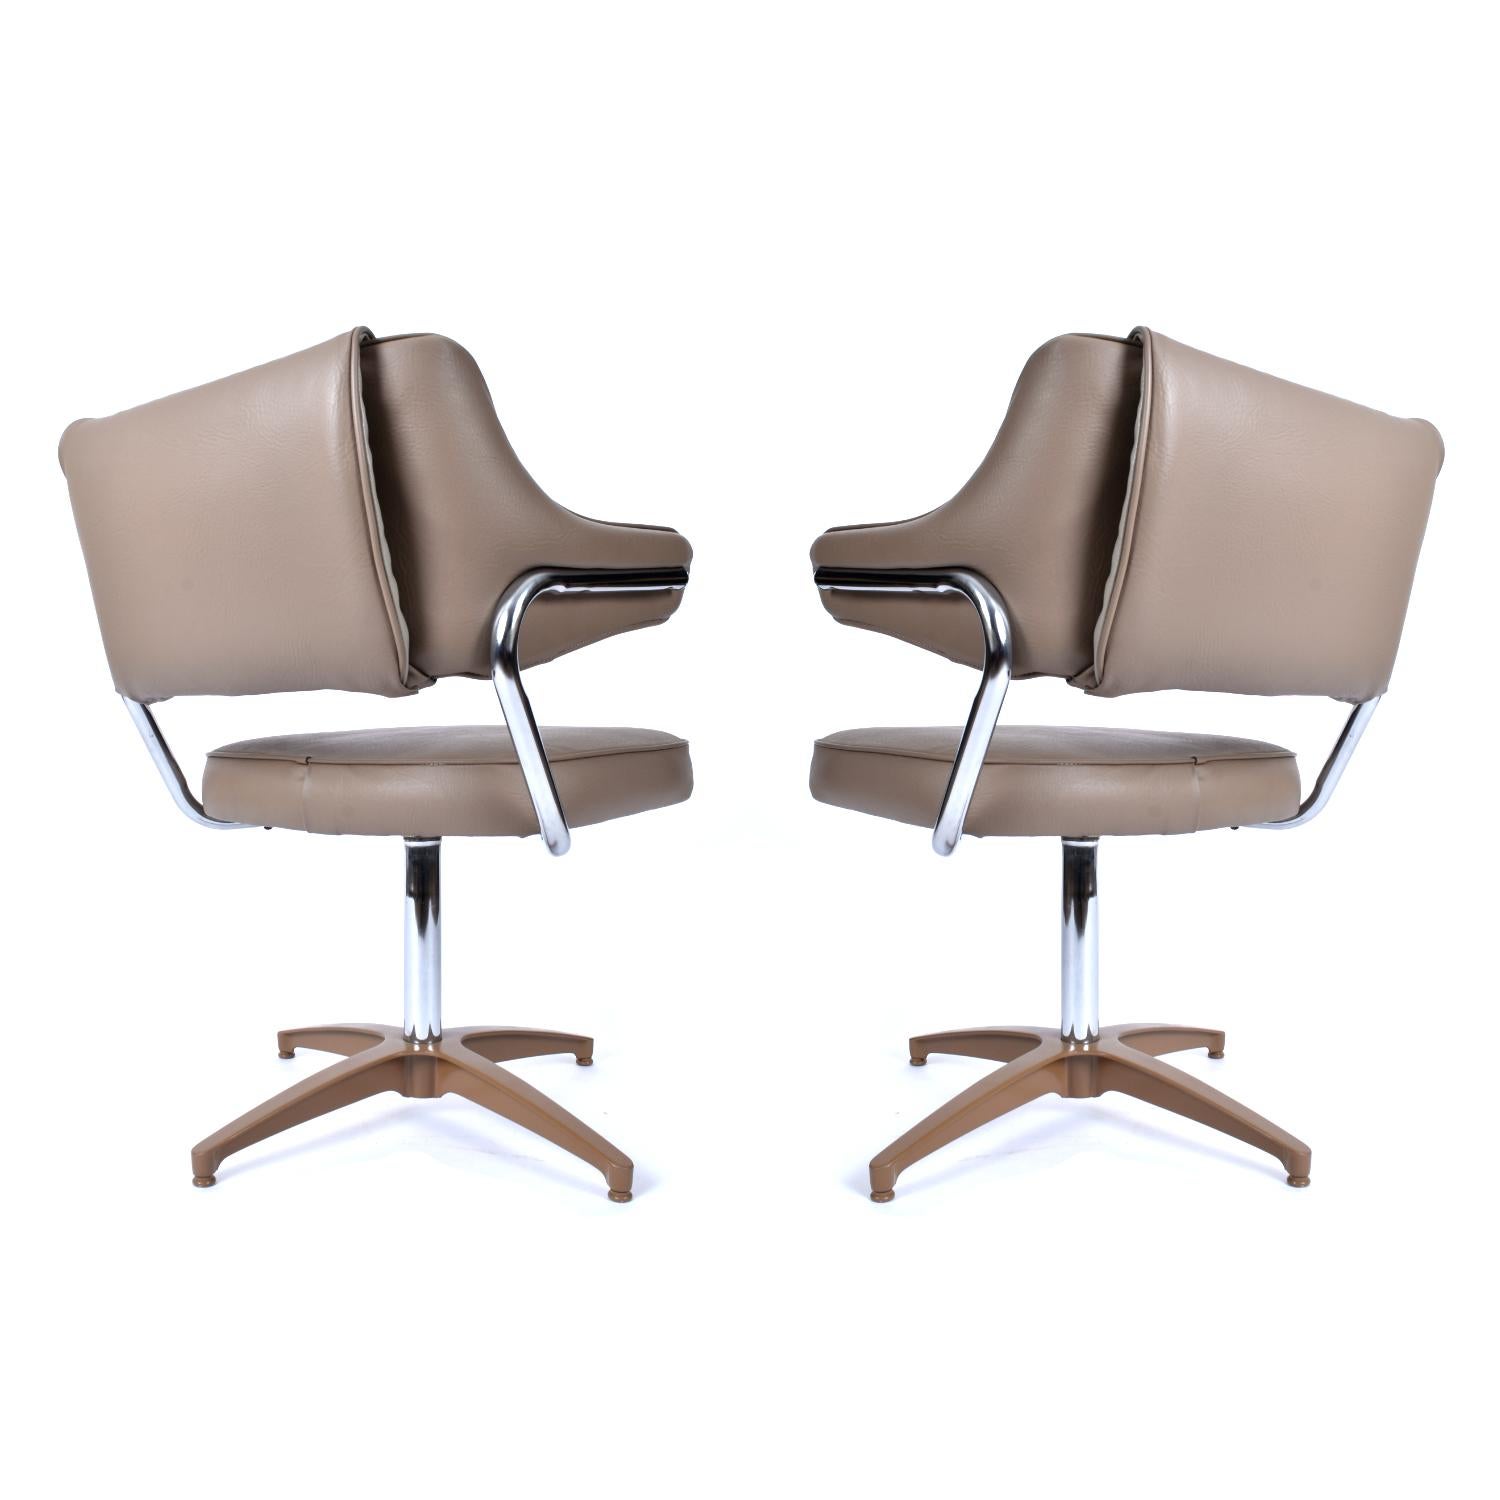 American Set of 6 Mid-Century Modern Beige and Chrome Swivel Task Chairs